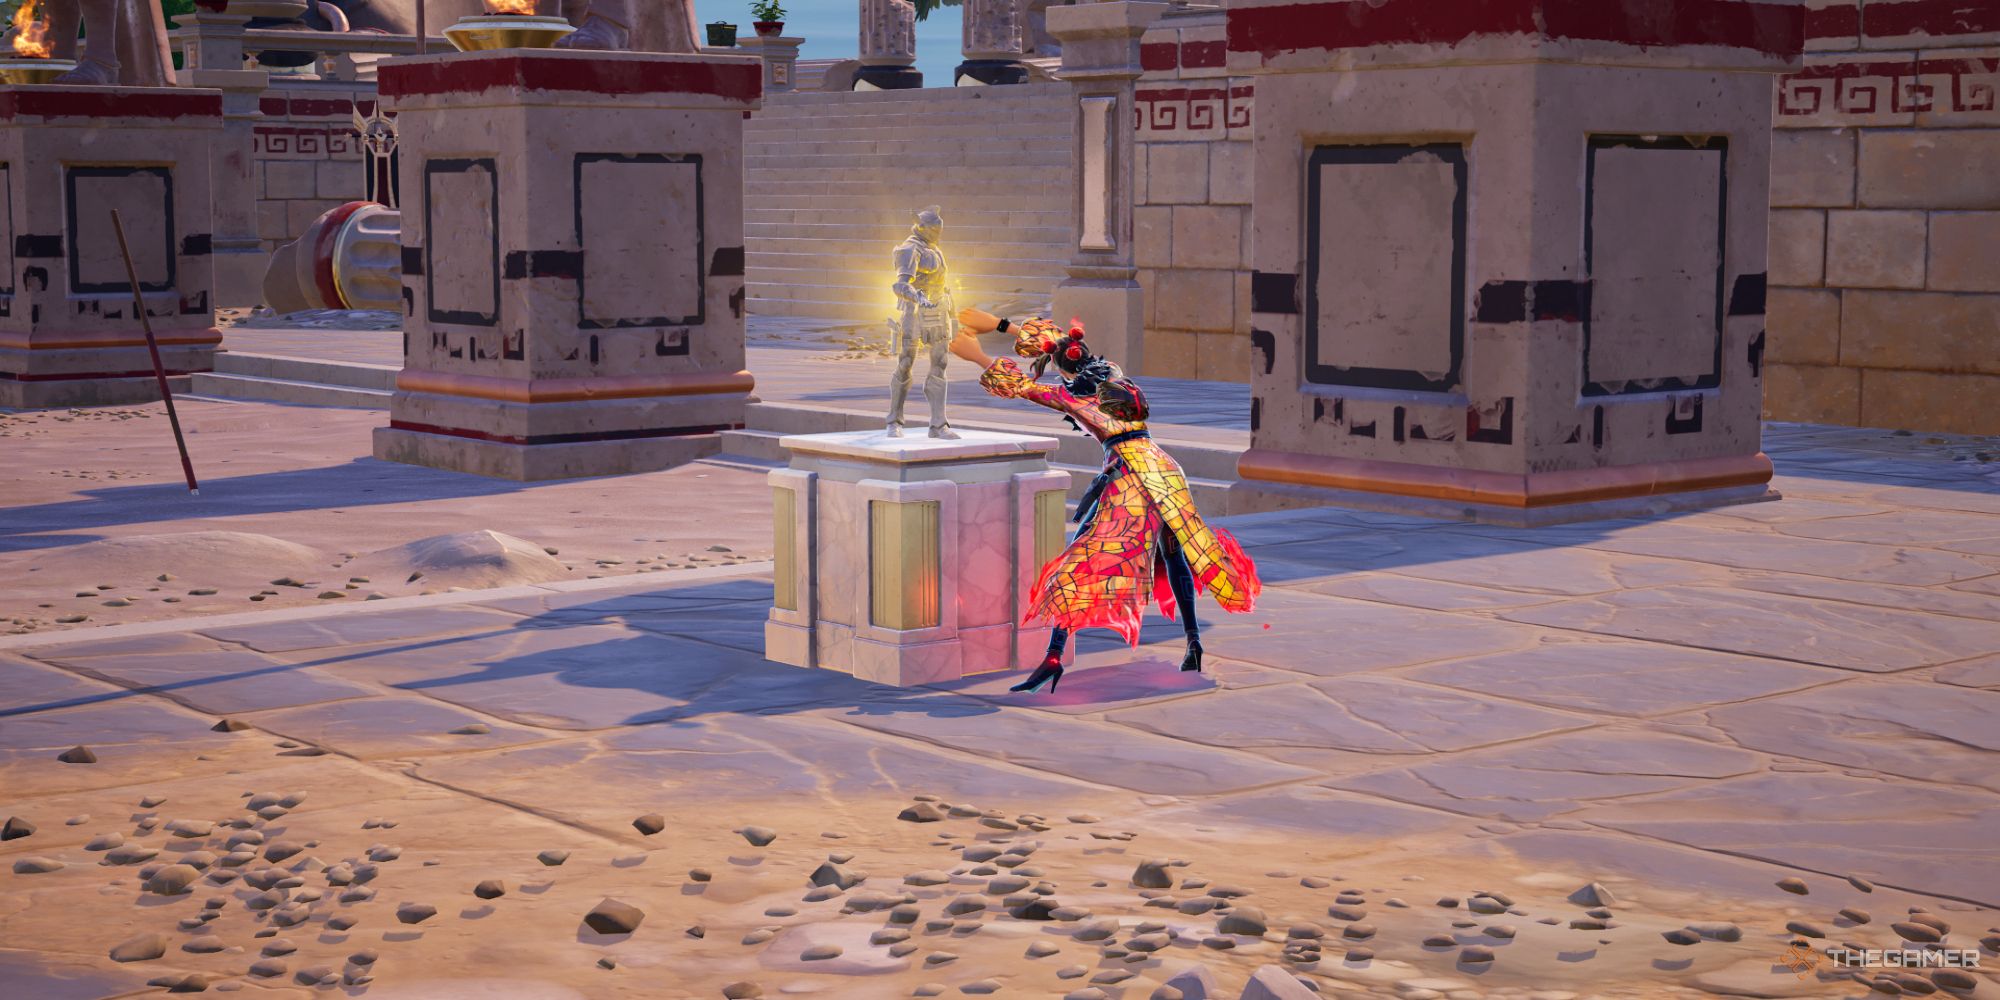 A screenshot from Fortnite showing the player character as Valeria at Brawler's Battleground grabbing the Ares statue at the altar to throw it to the side.